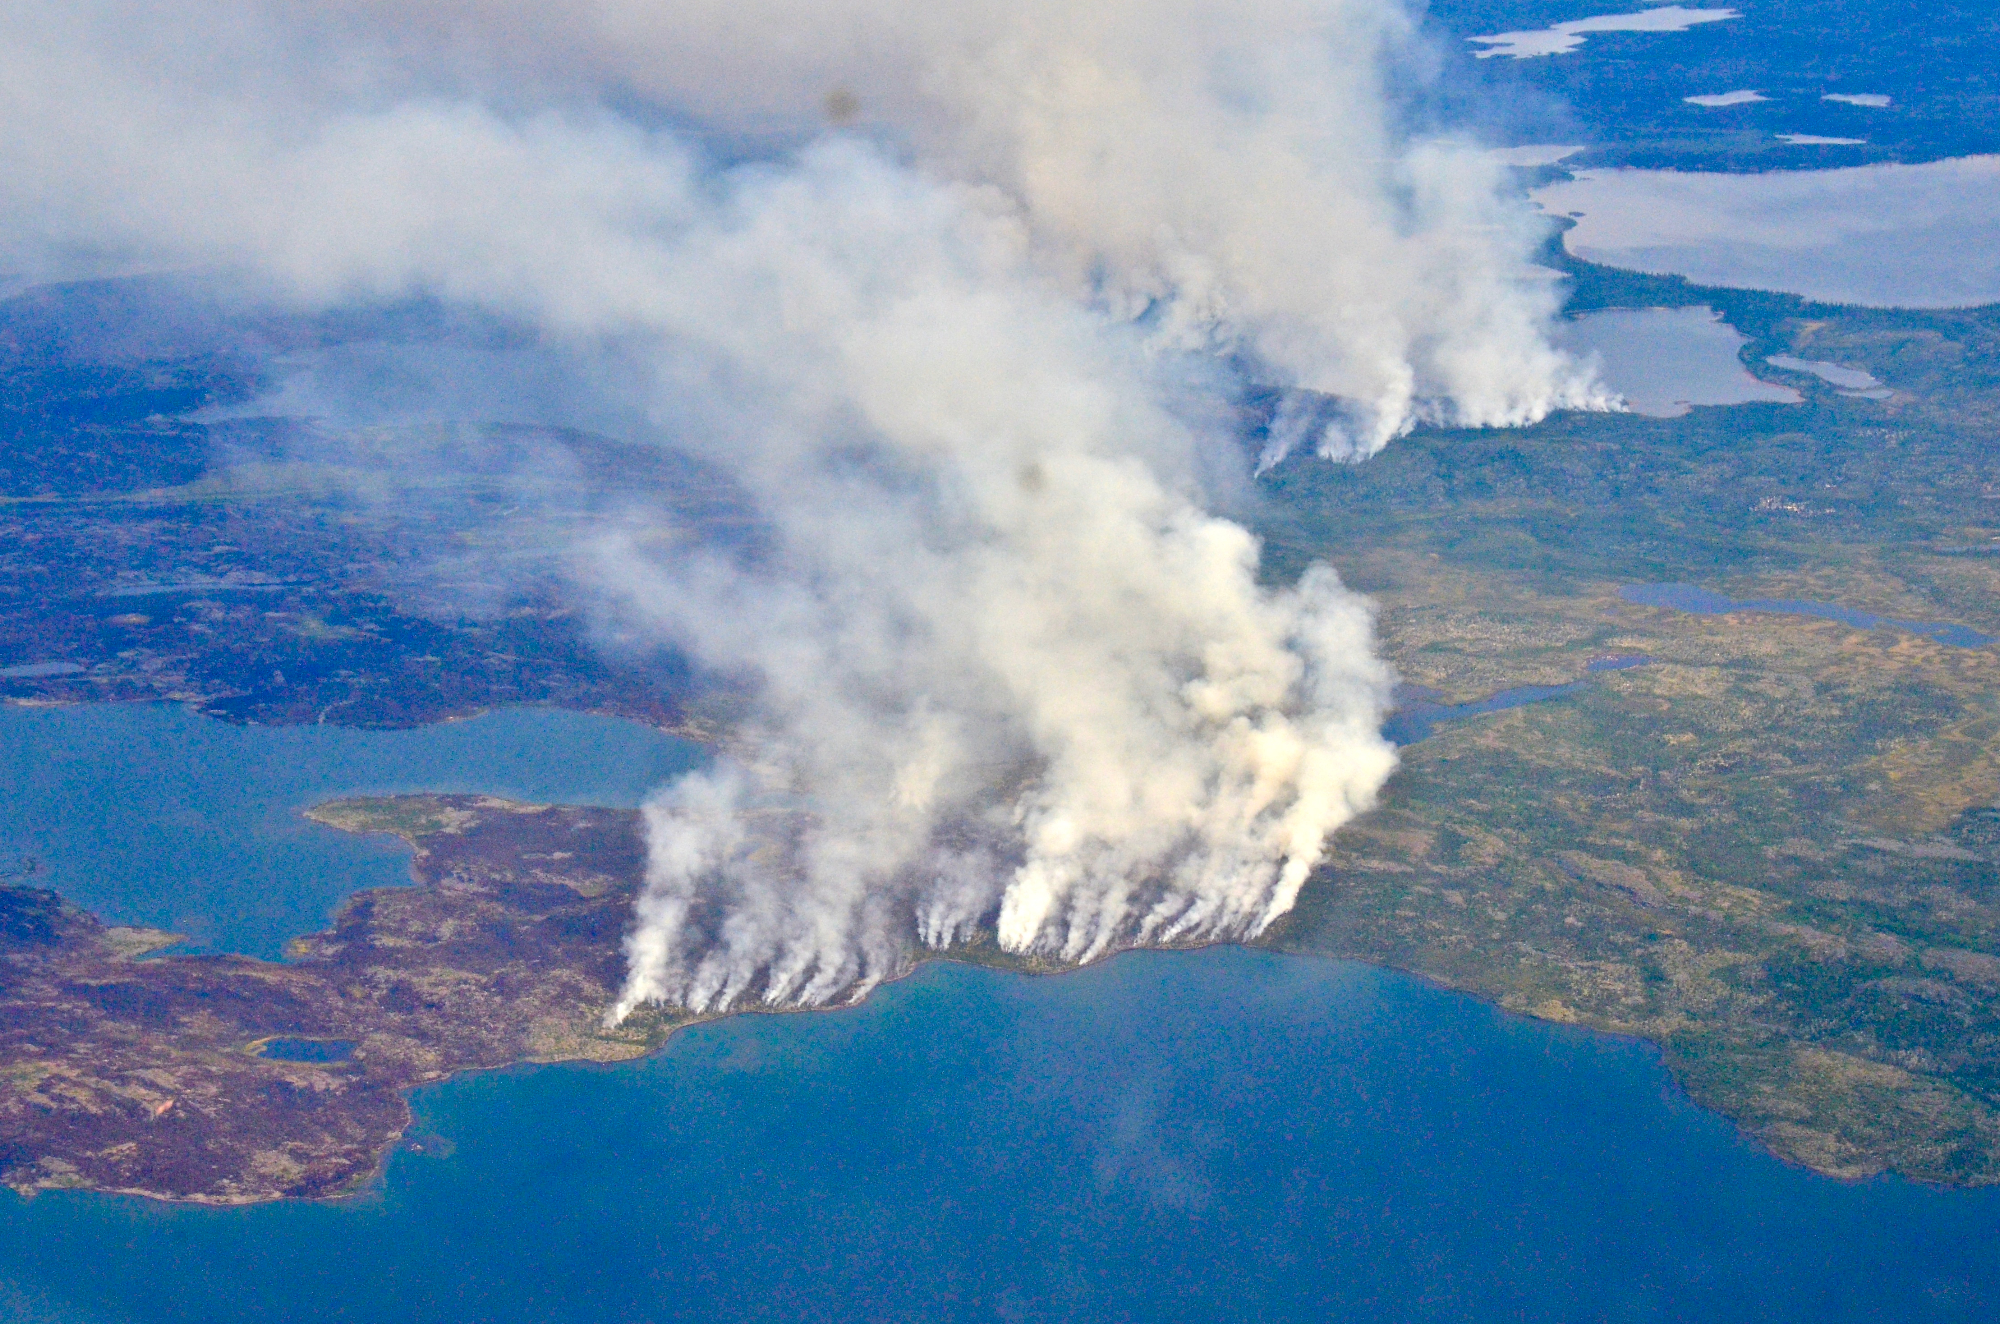 Large smoke plumes drift over land and ocean.